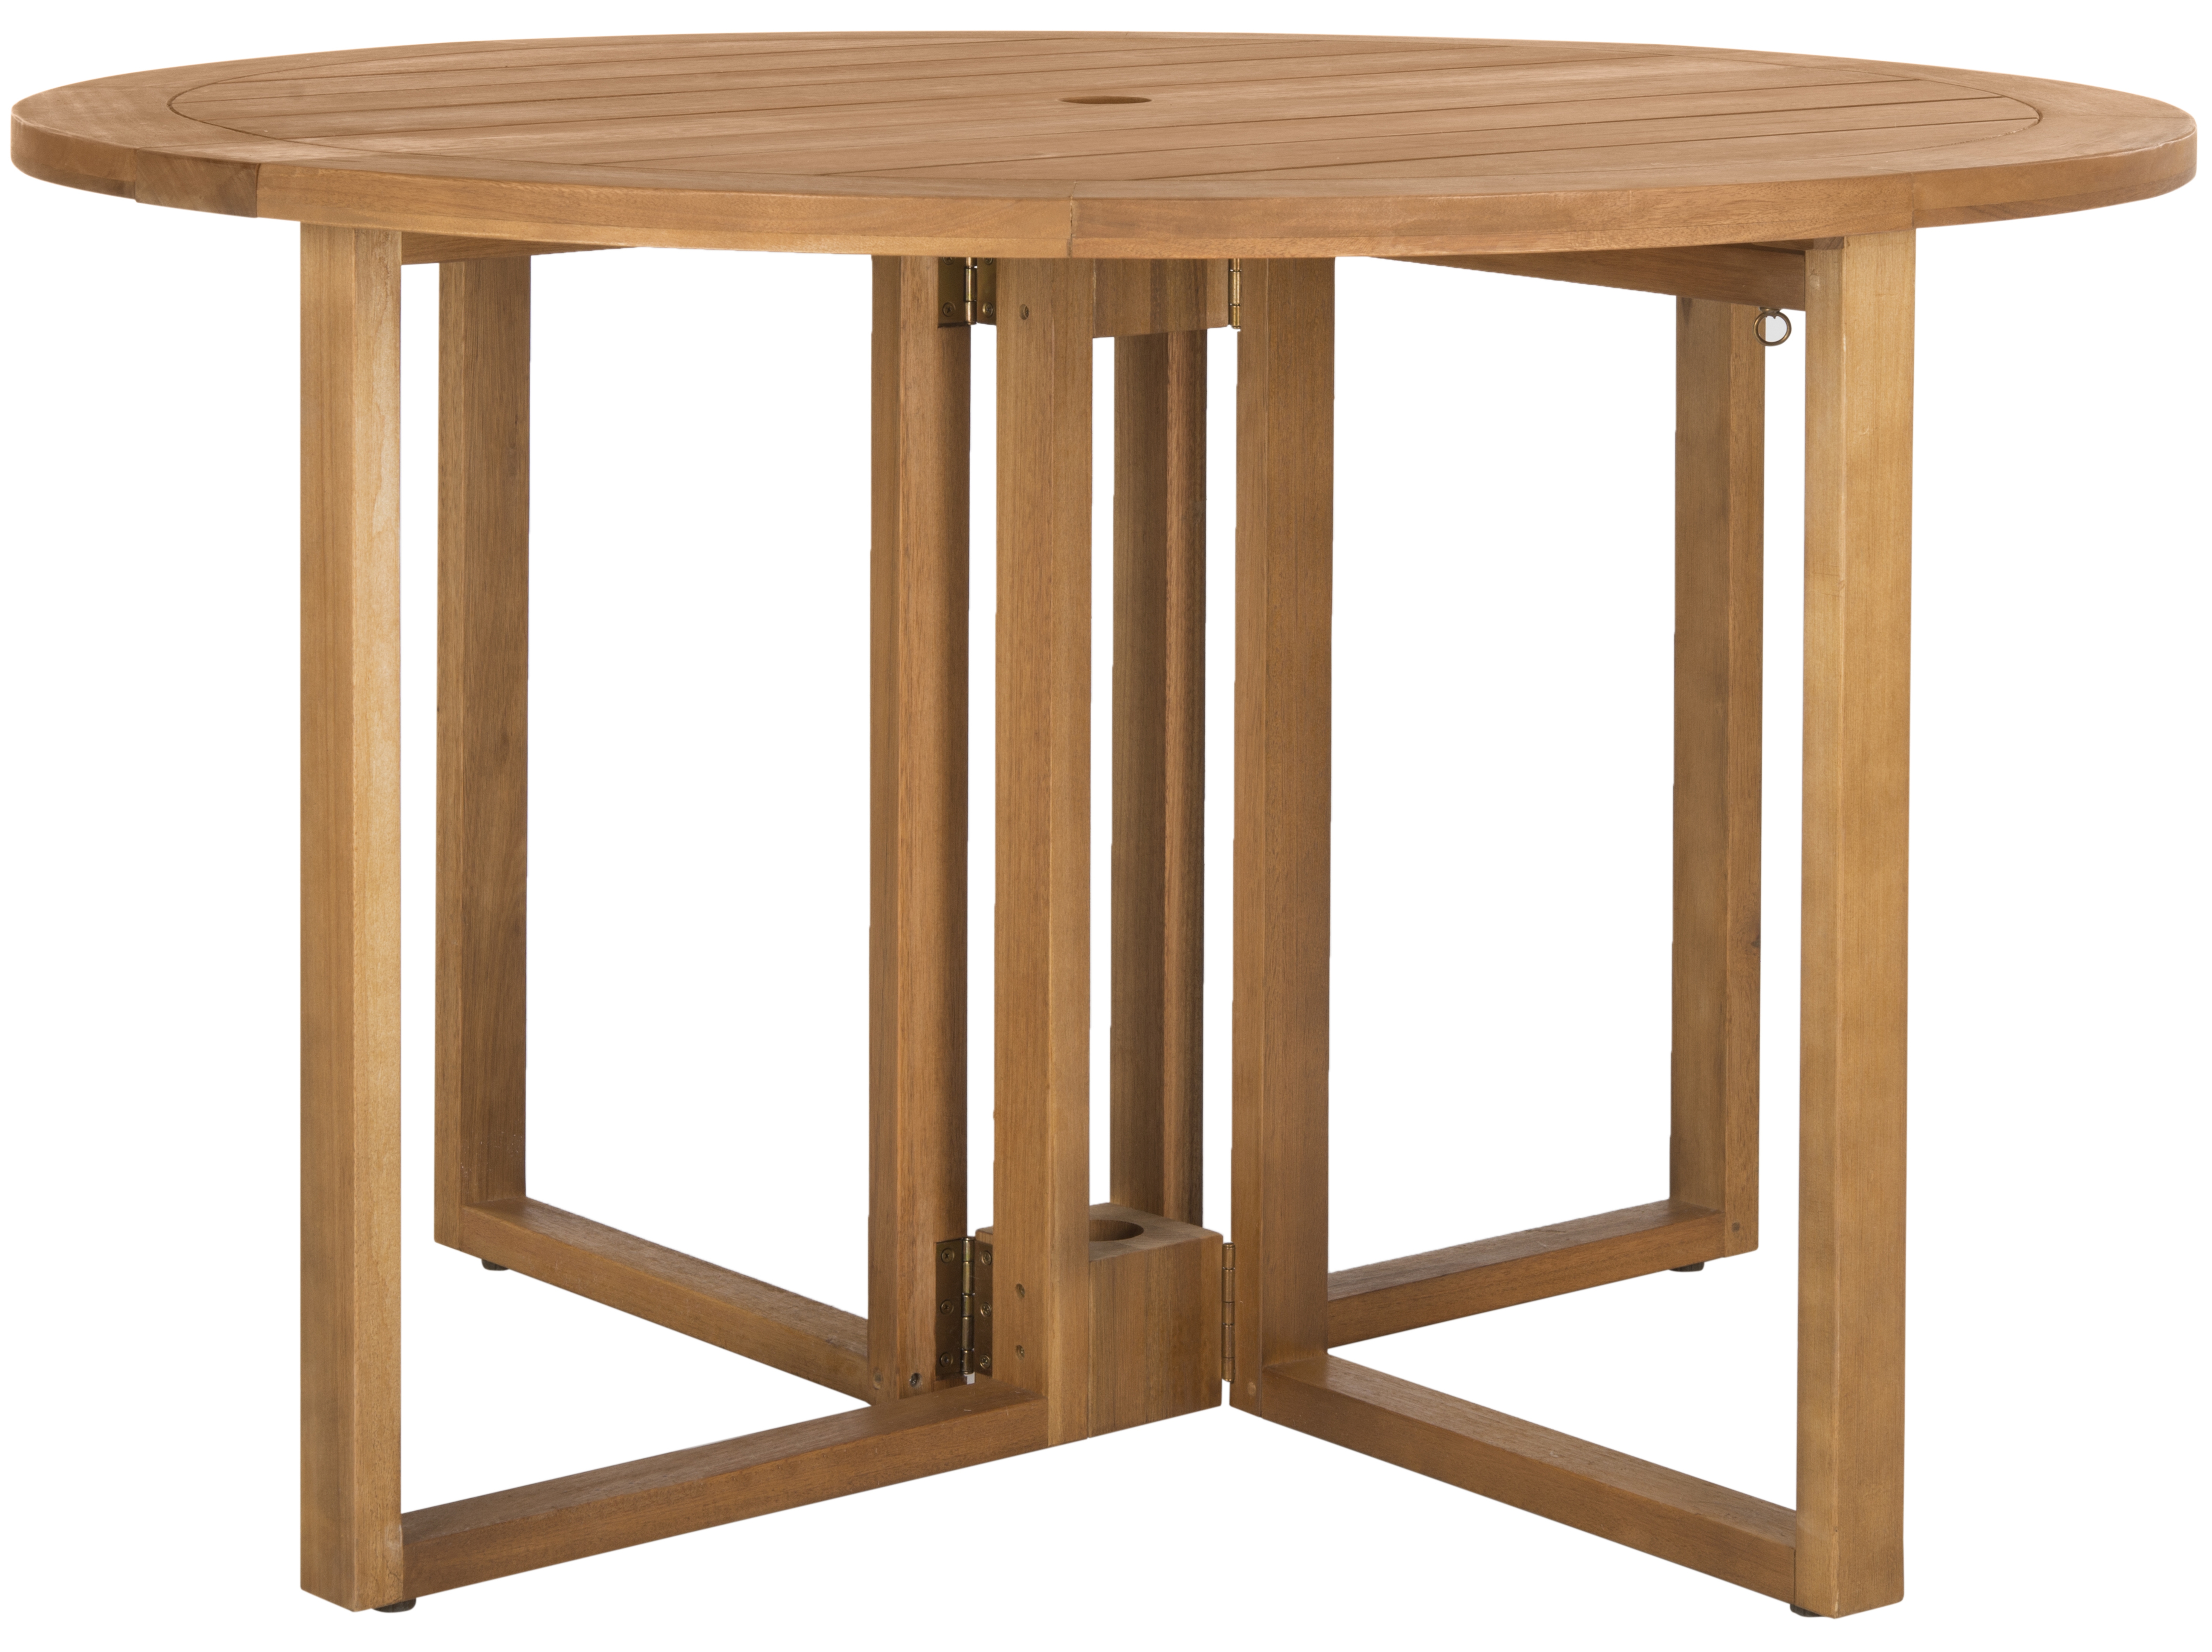 Wales Round 47.24-Inch Dia Dining Table - Natural - Arlo Home - Arlo Home